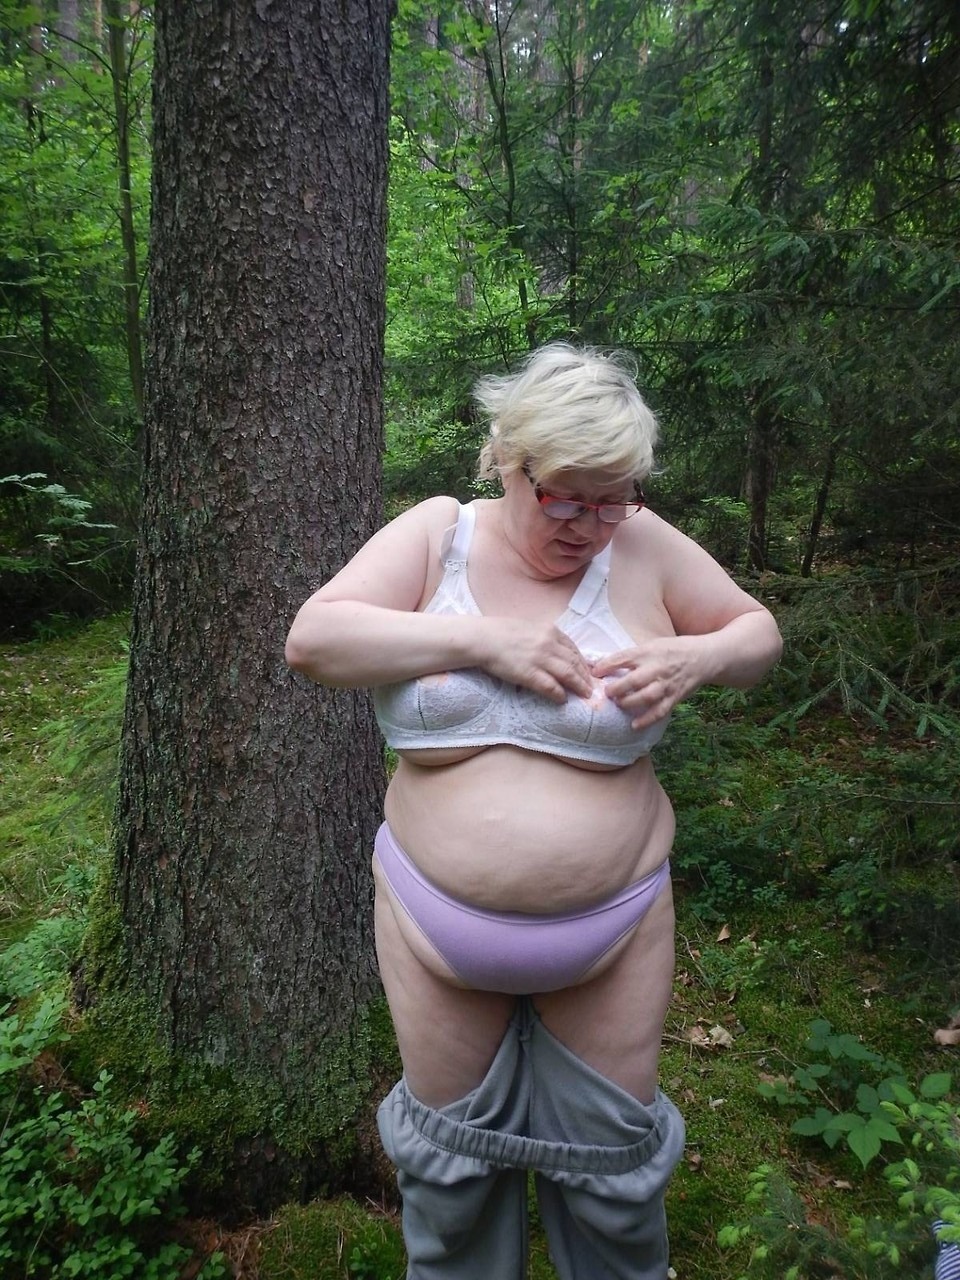 This chubby old granny is undressing in the woods much to our delight. What a big